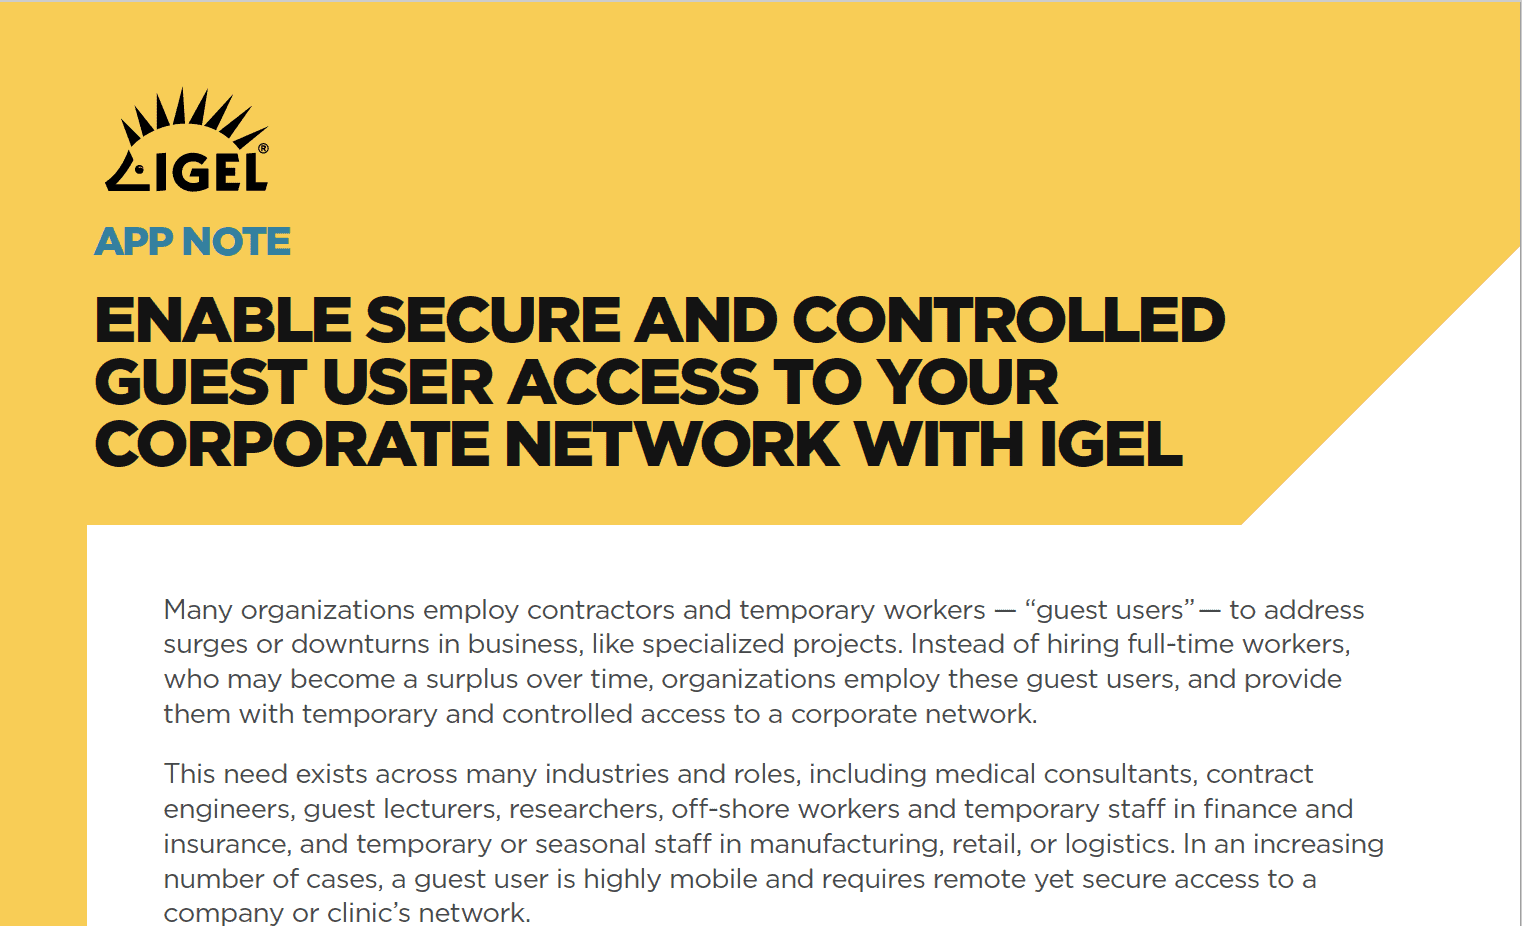 Enable Secure and Controlled Guest User Access to Your Corporate Network with IGEL